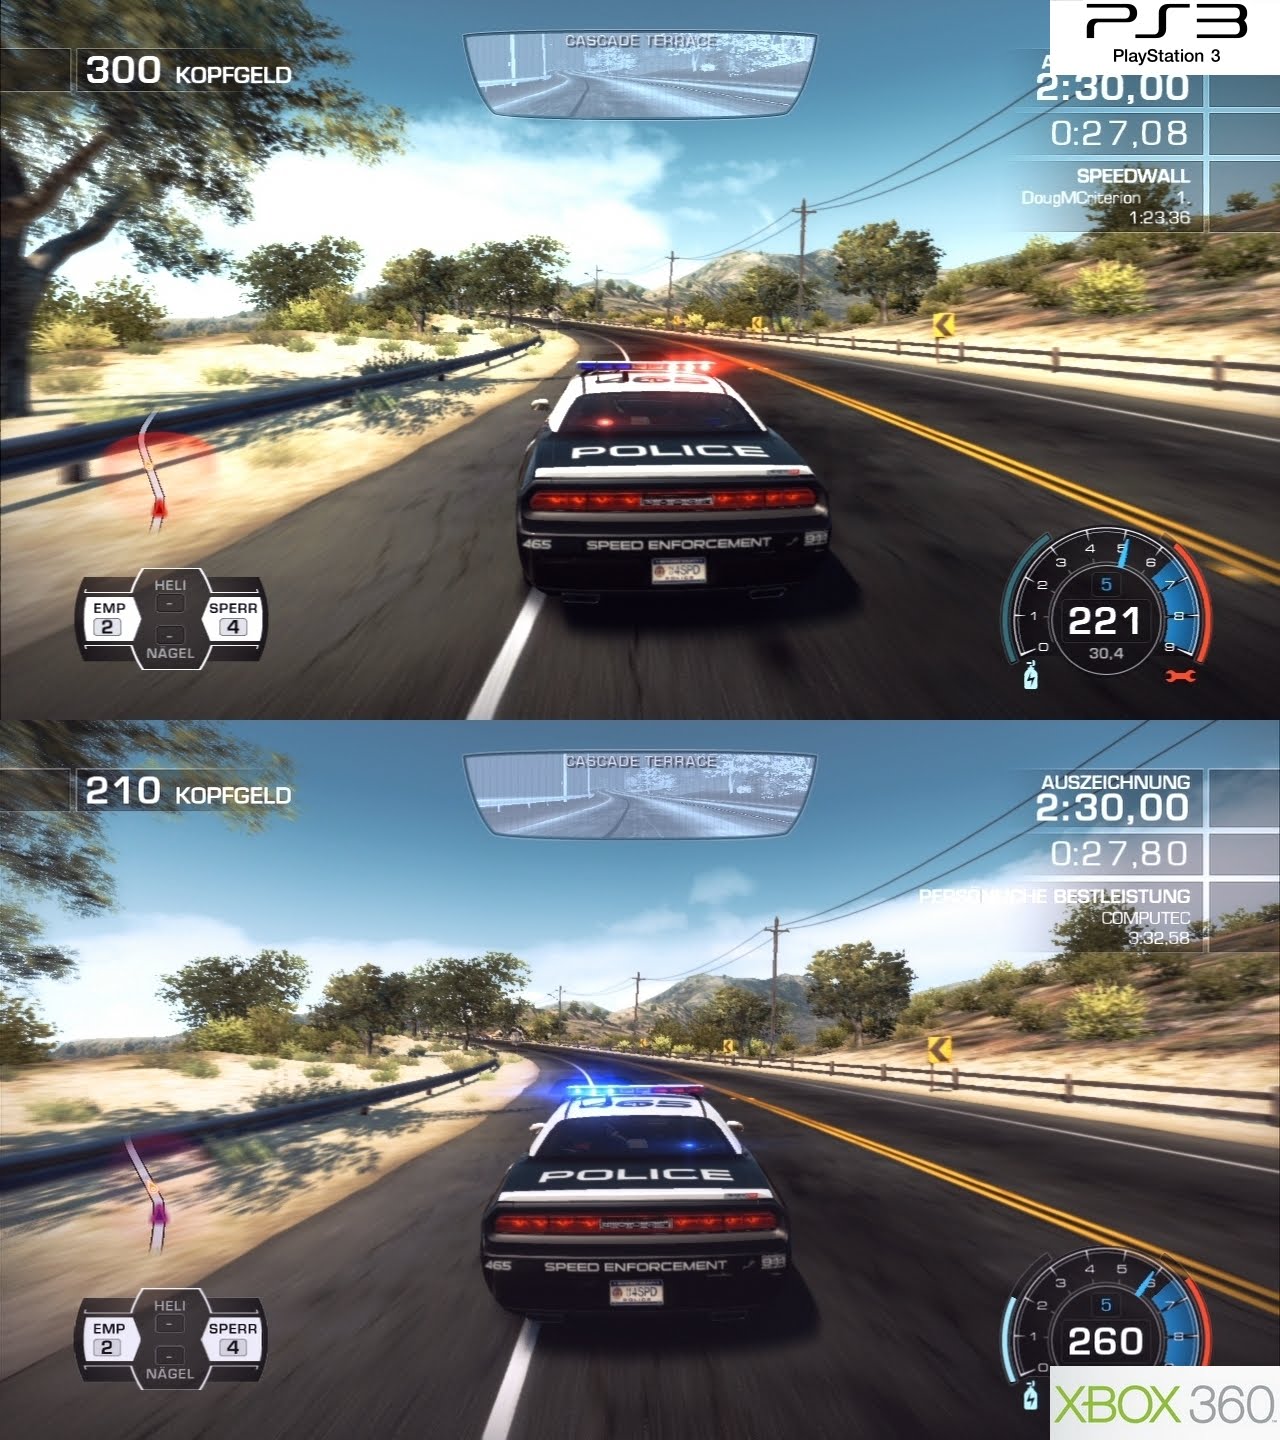 Need For Speed Hot Pursuit - Xbox 360